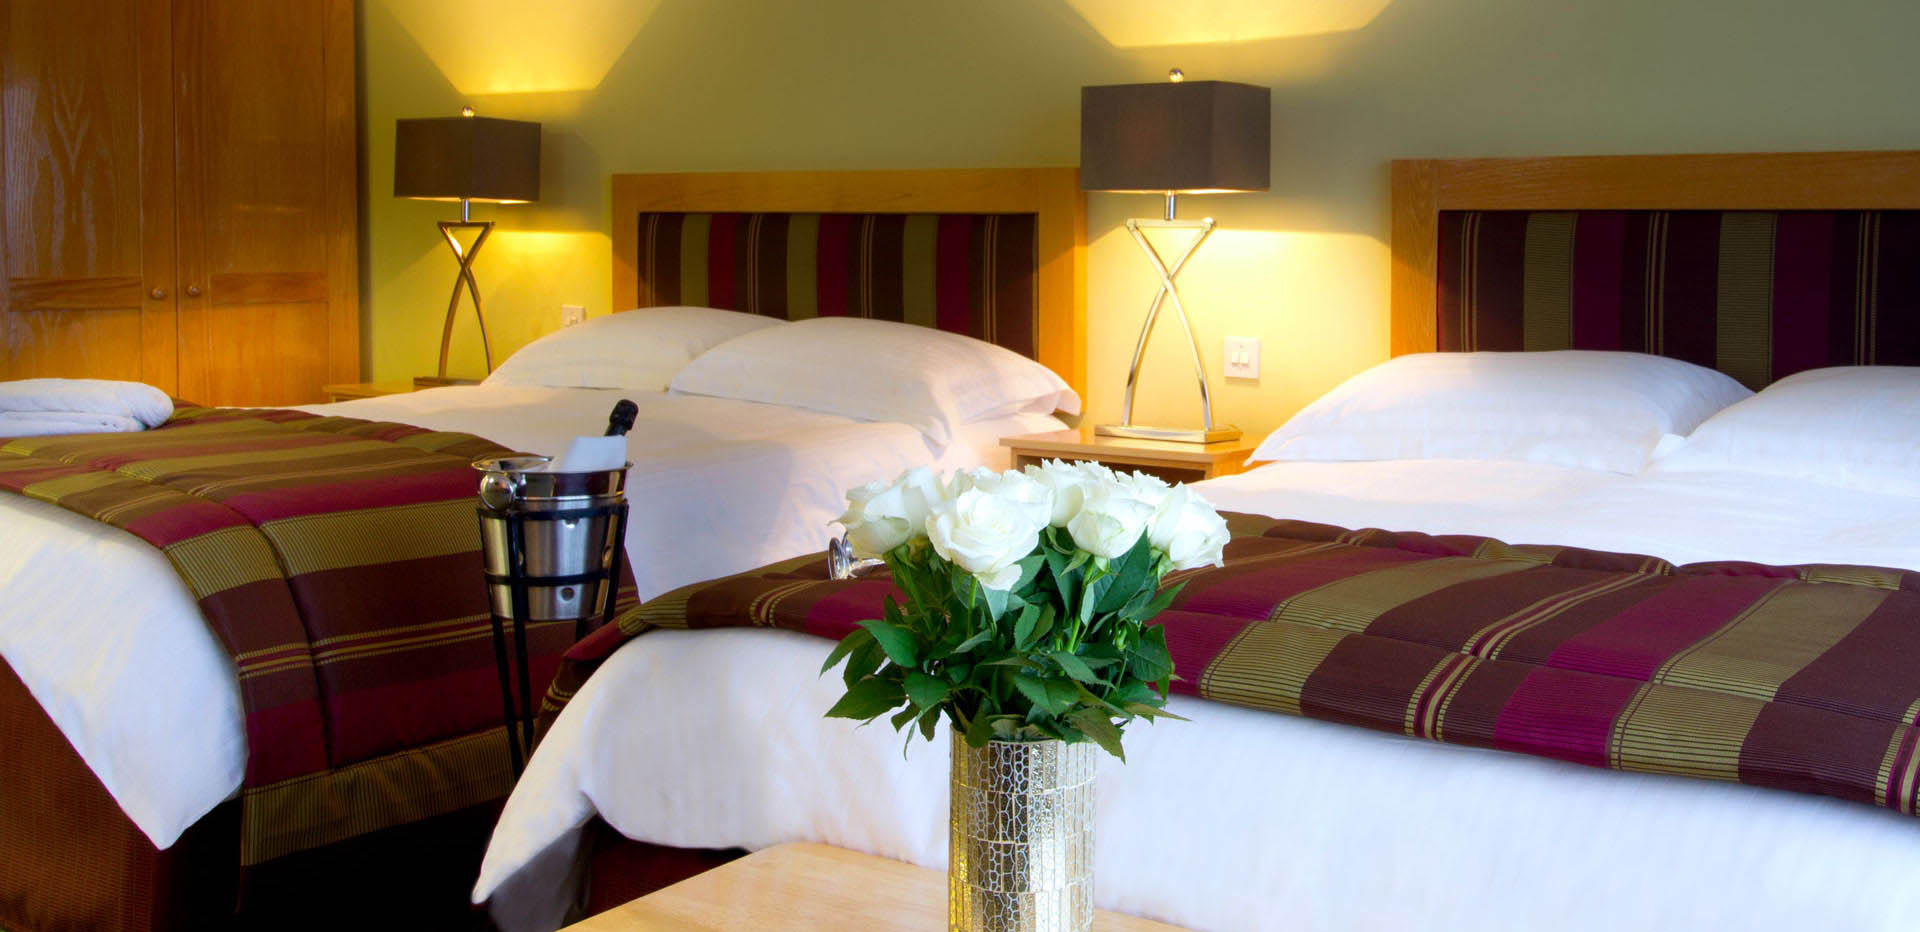 Each room with a stunning view of Sheephaven Bay